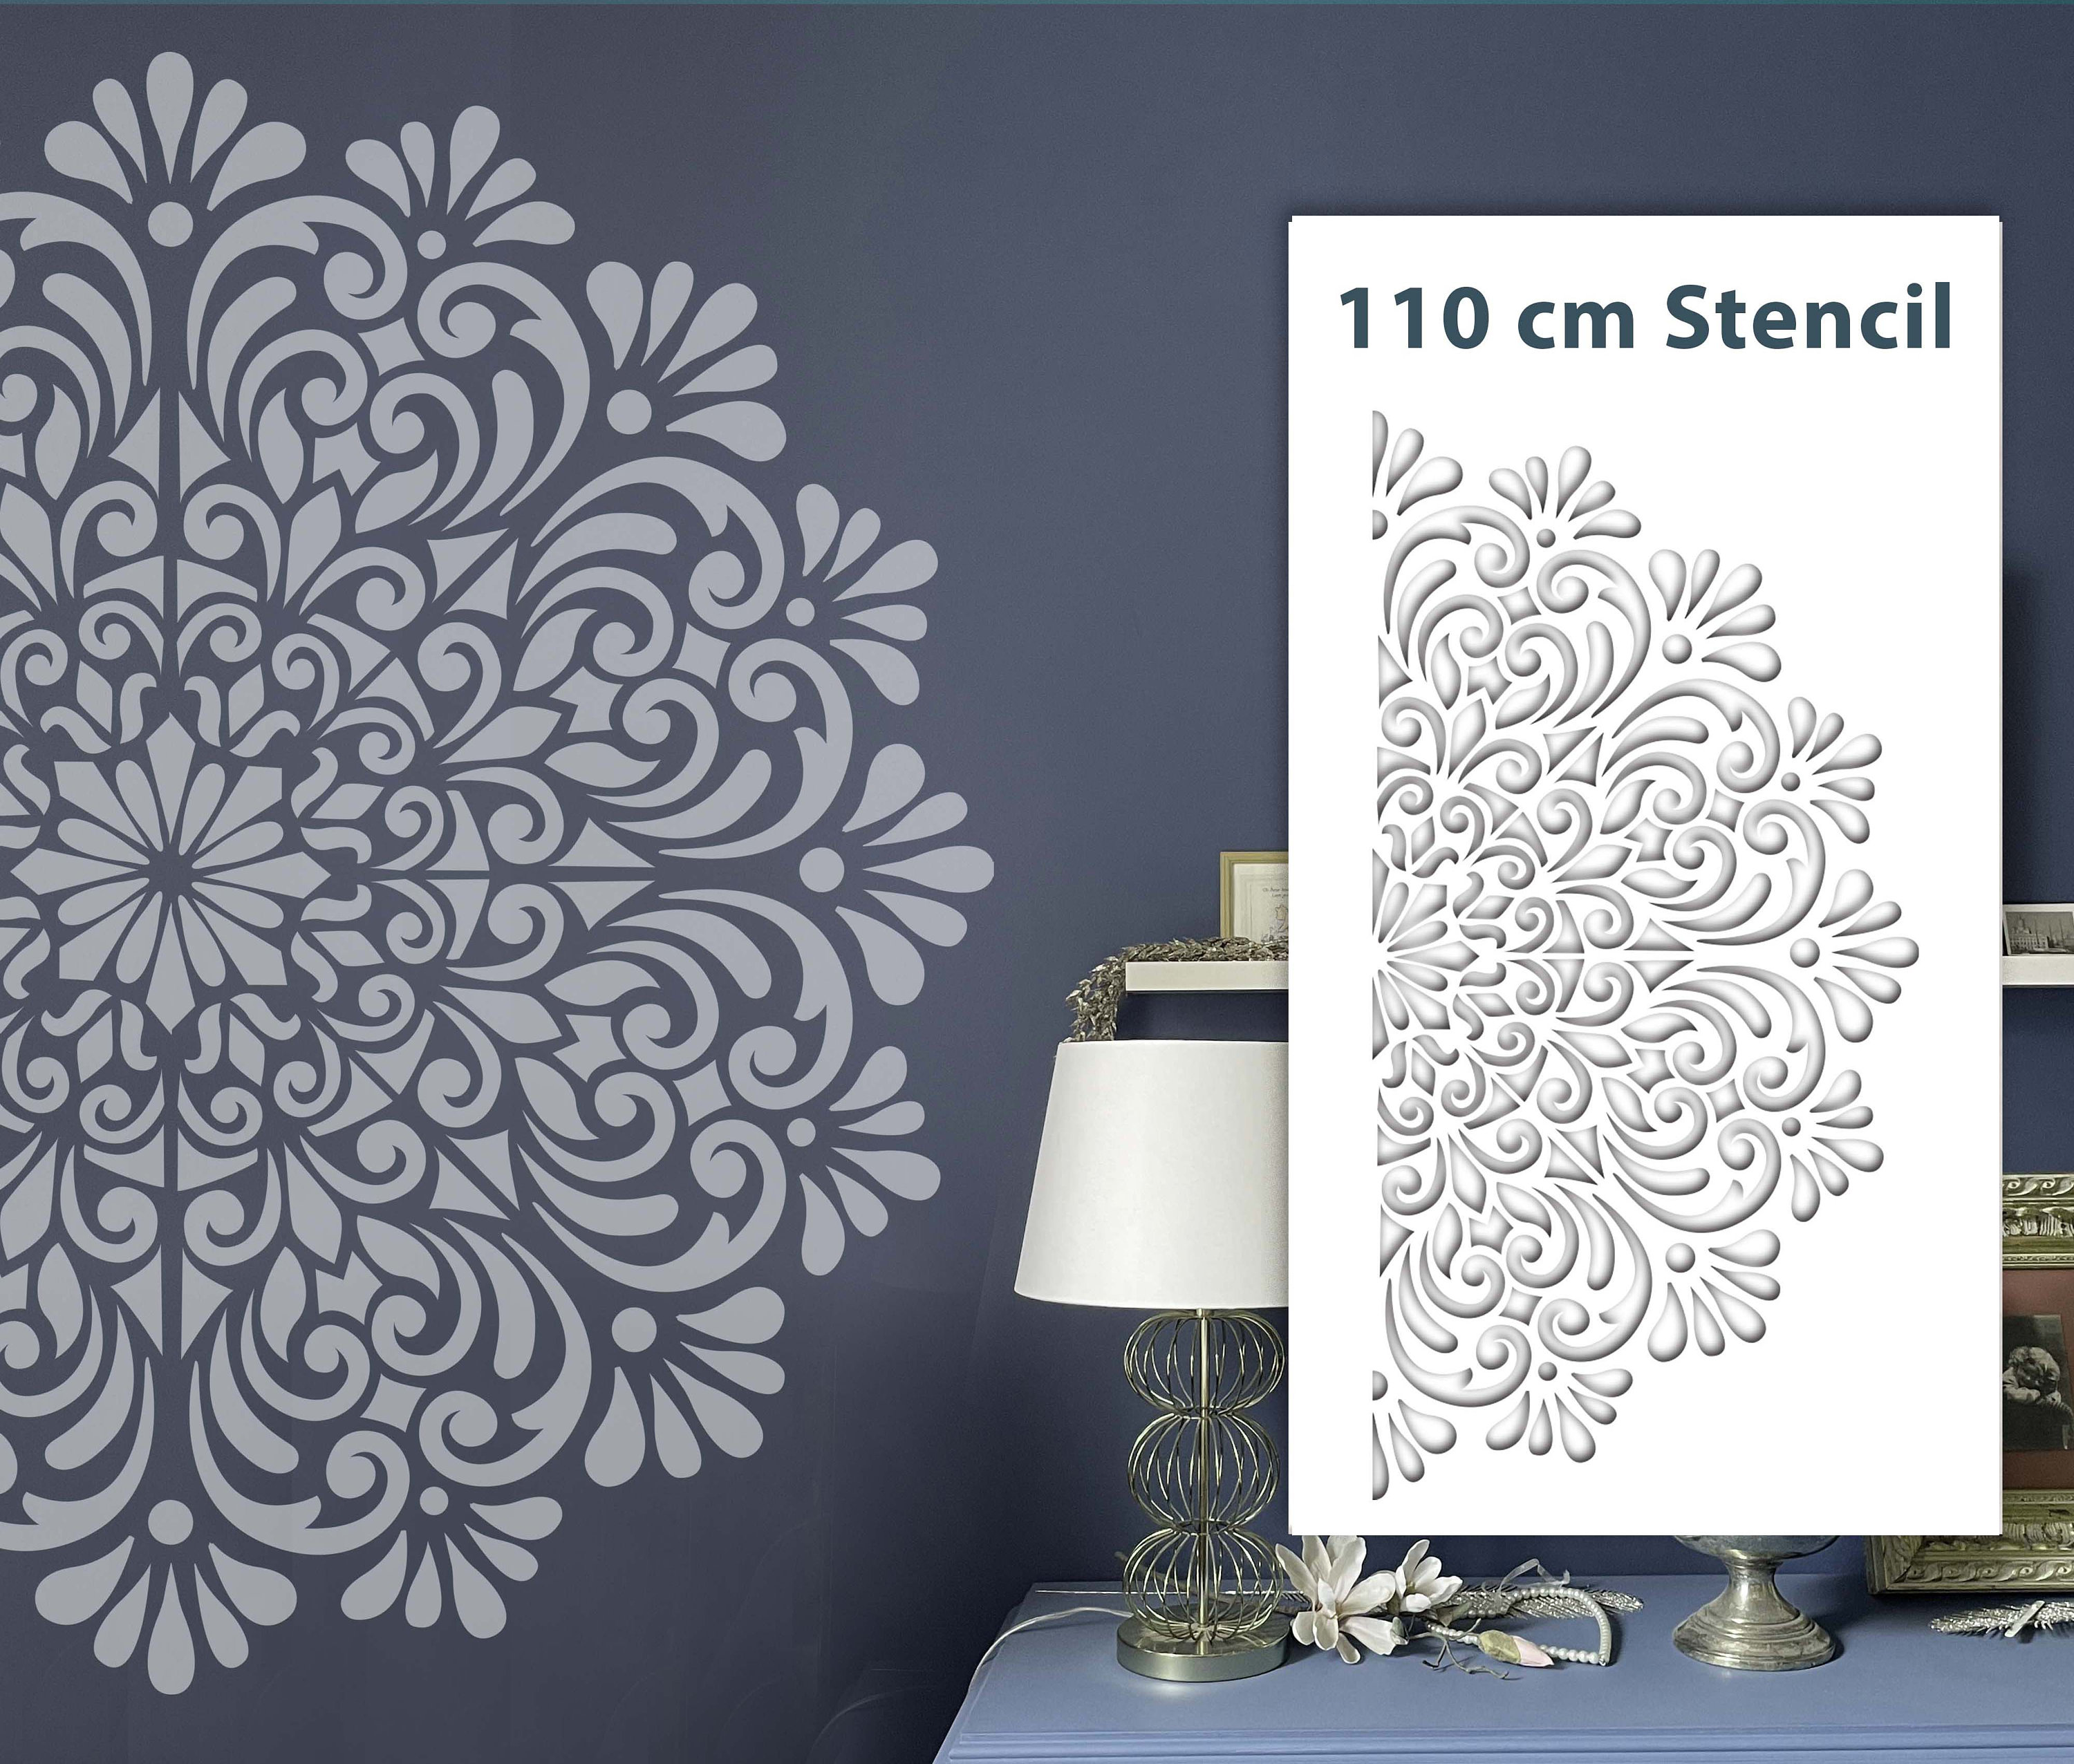 SKETCHED CIRCLE Stencils for Decorating Walls. Stunning Geometric